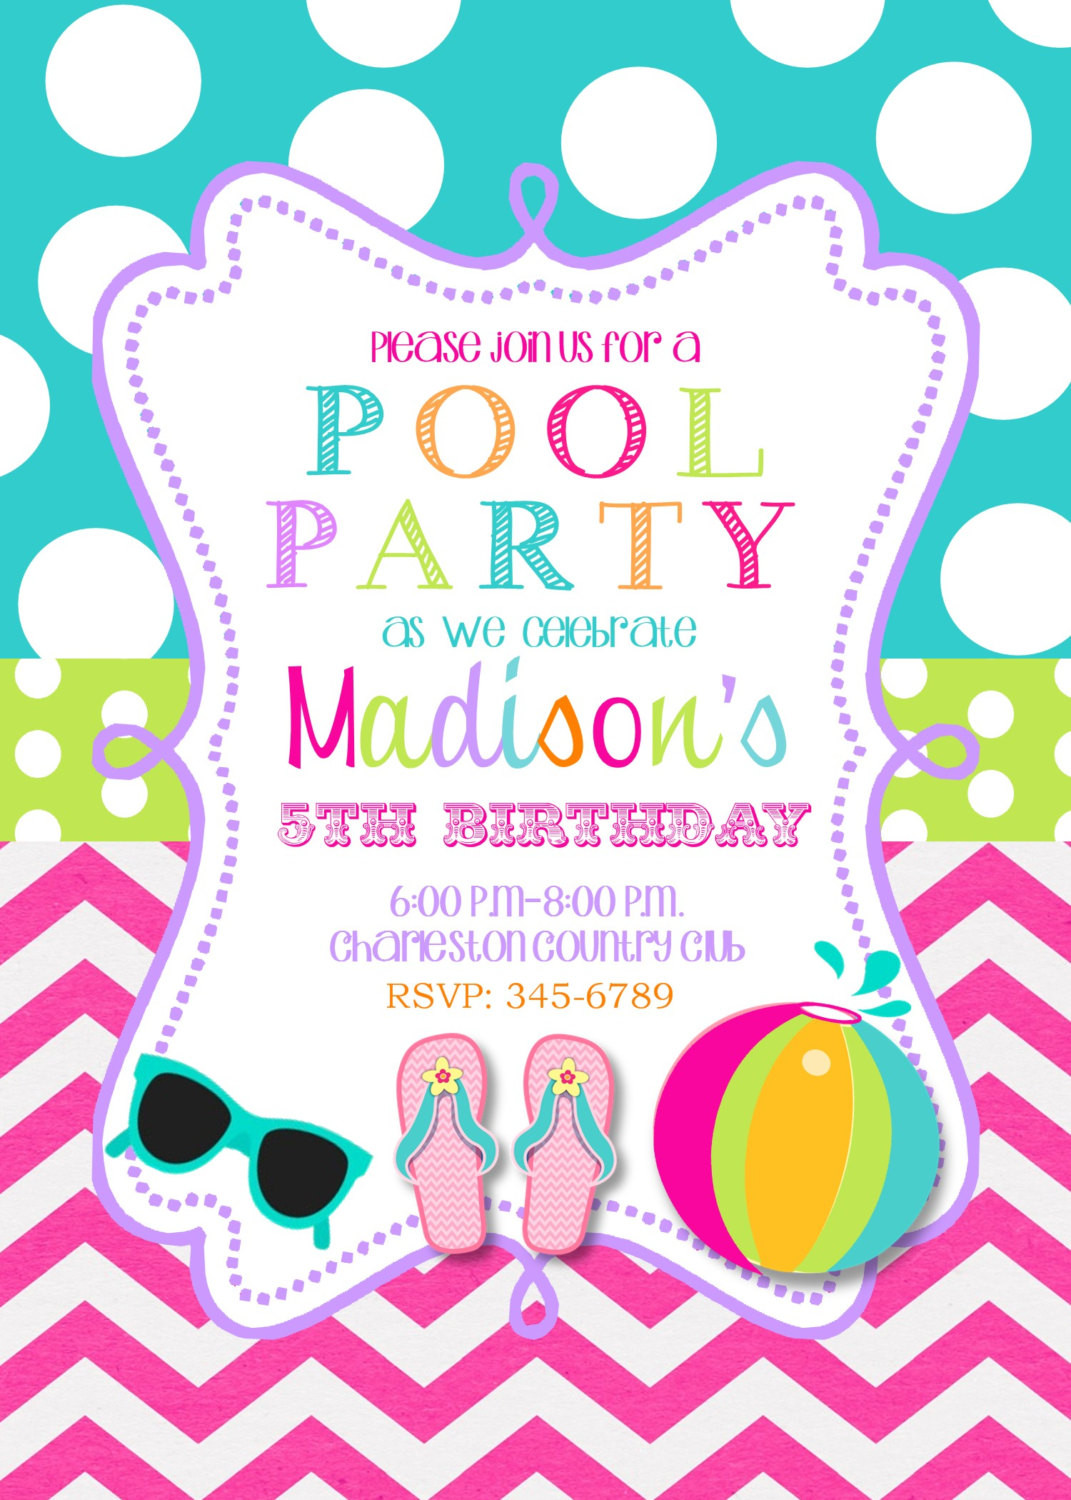 Pool Party Invitation Wording Ideas
 Pool Party Birthday Party invitations printable or digital